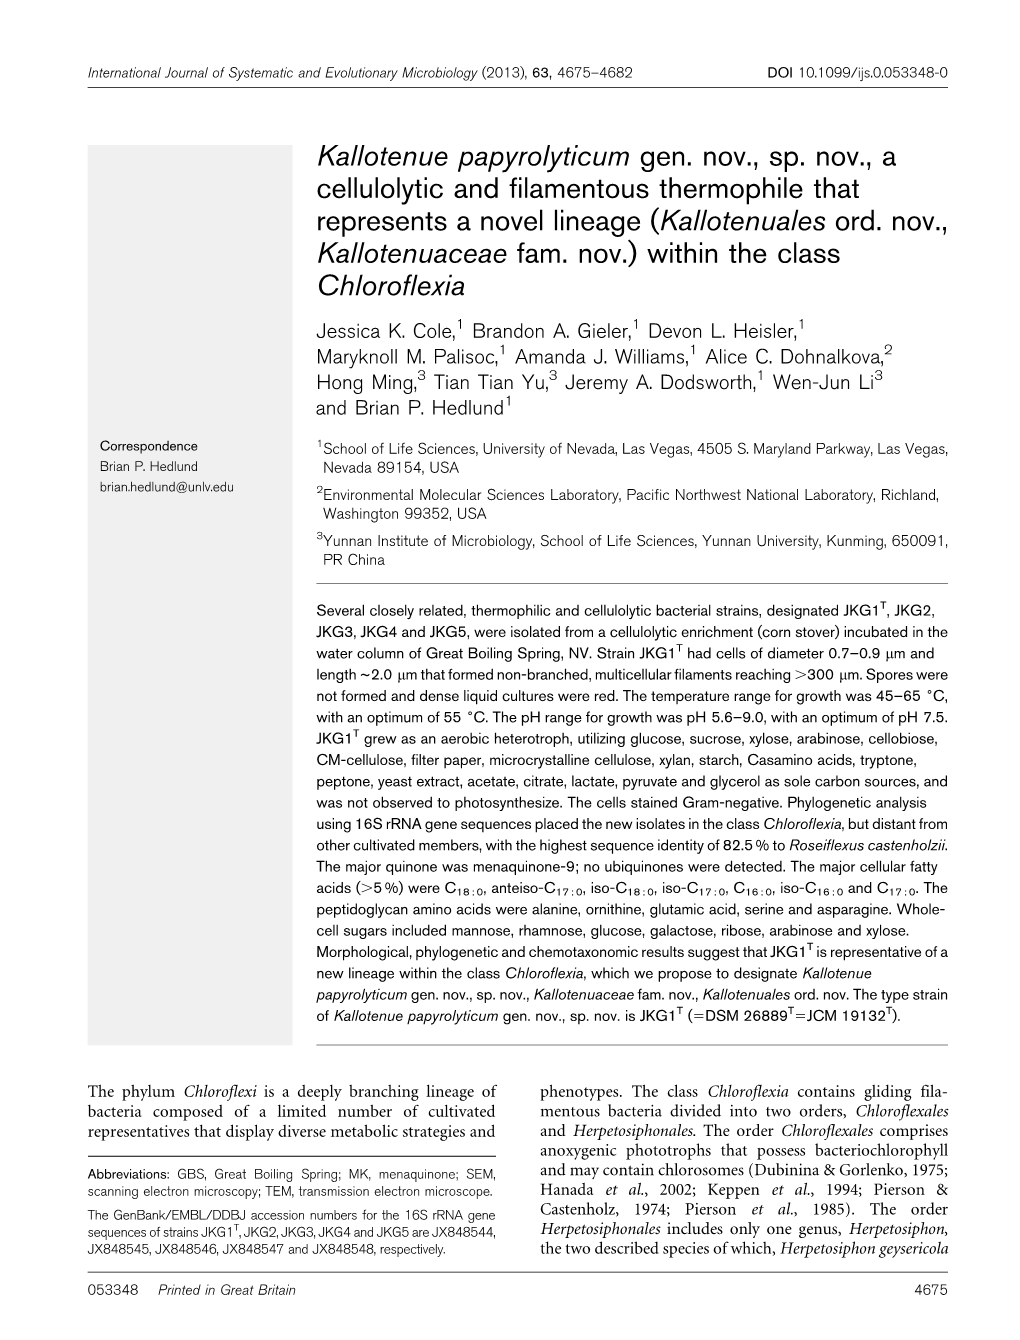 Kallotenue Papyrolyticum Gen. Nov., Sp. Nov., a Cellulolytic and Filamentous Thermophile That Represents a Novel Lineage (Kallotenuales Ord